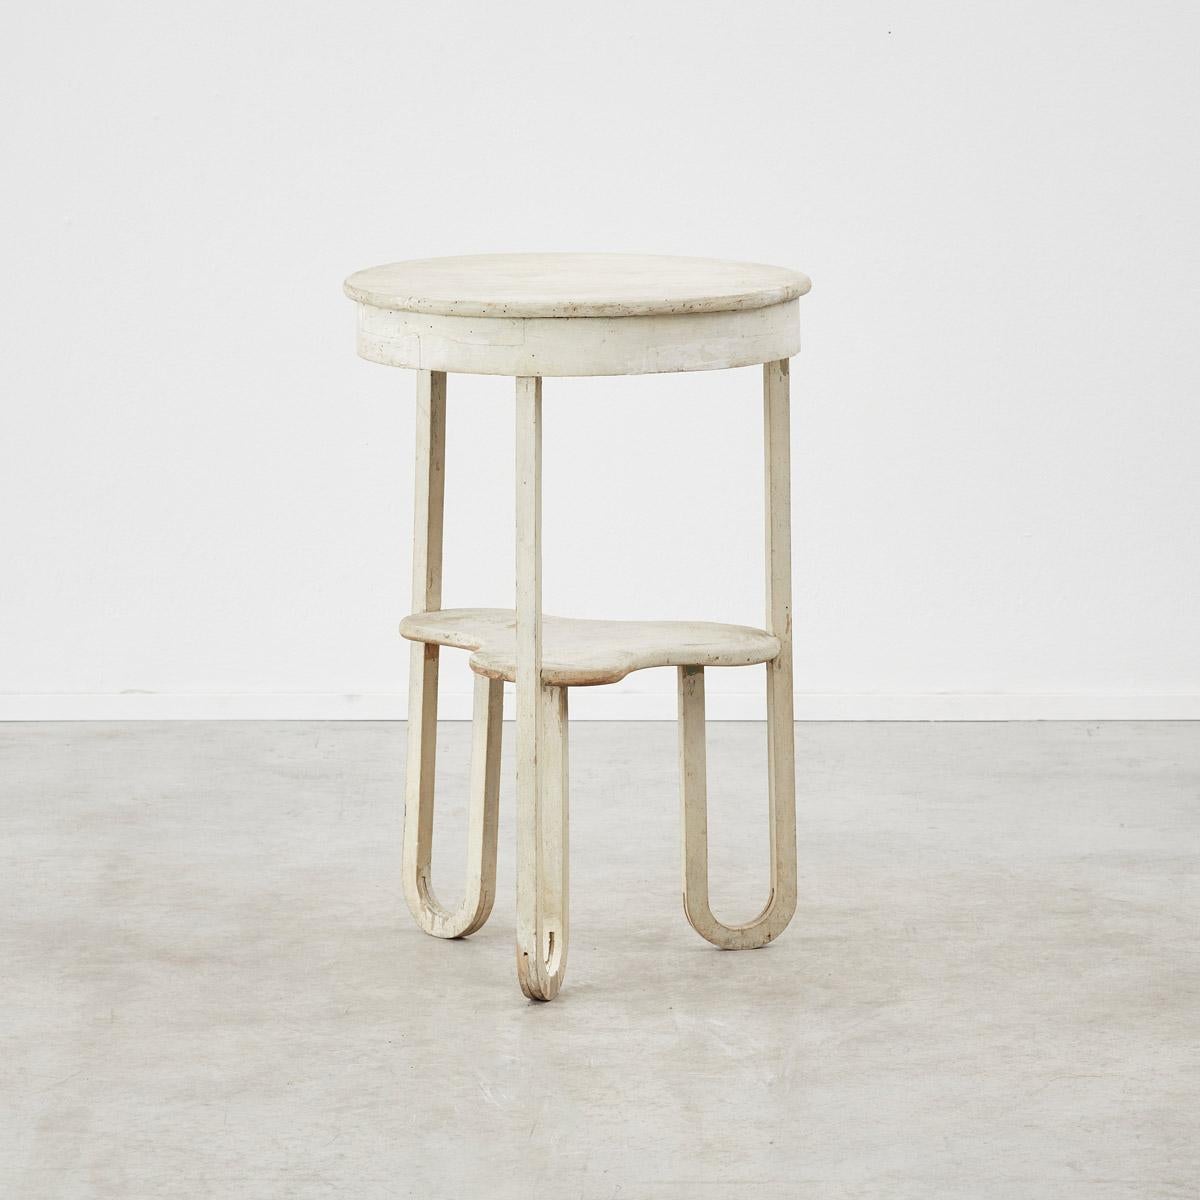 Elegant forms and shapes interlink to form this fun  chalk painted  wooden side table. The distressed paint effect appears as a textured matte lime wash, giving it a weathered look. Great functionality as a tall side table or hall table.